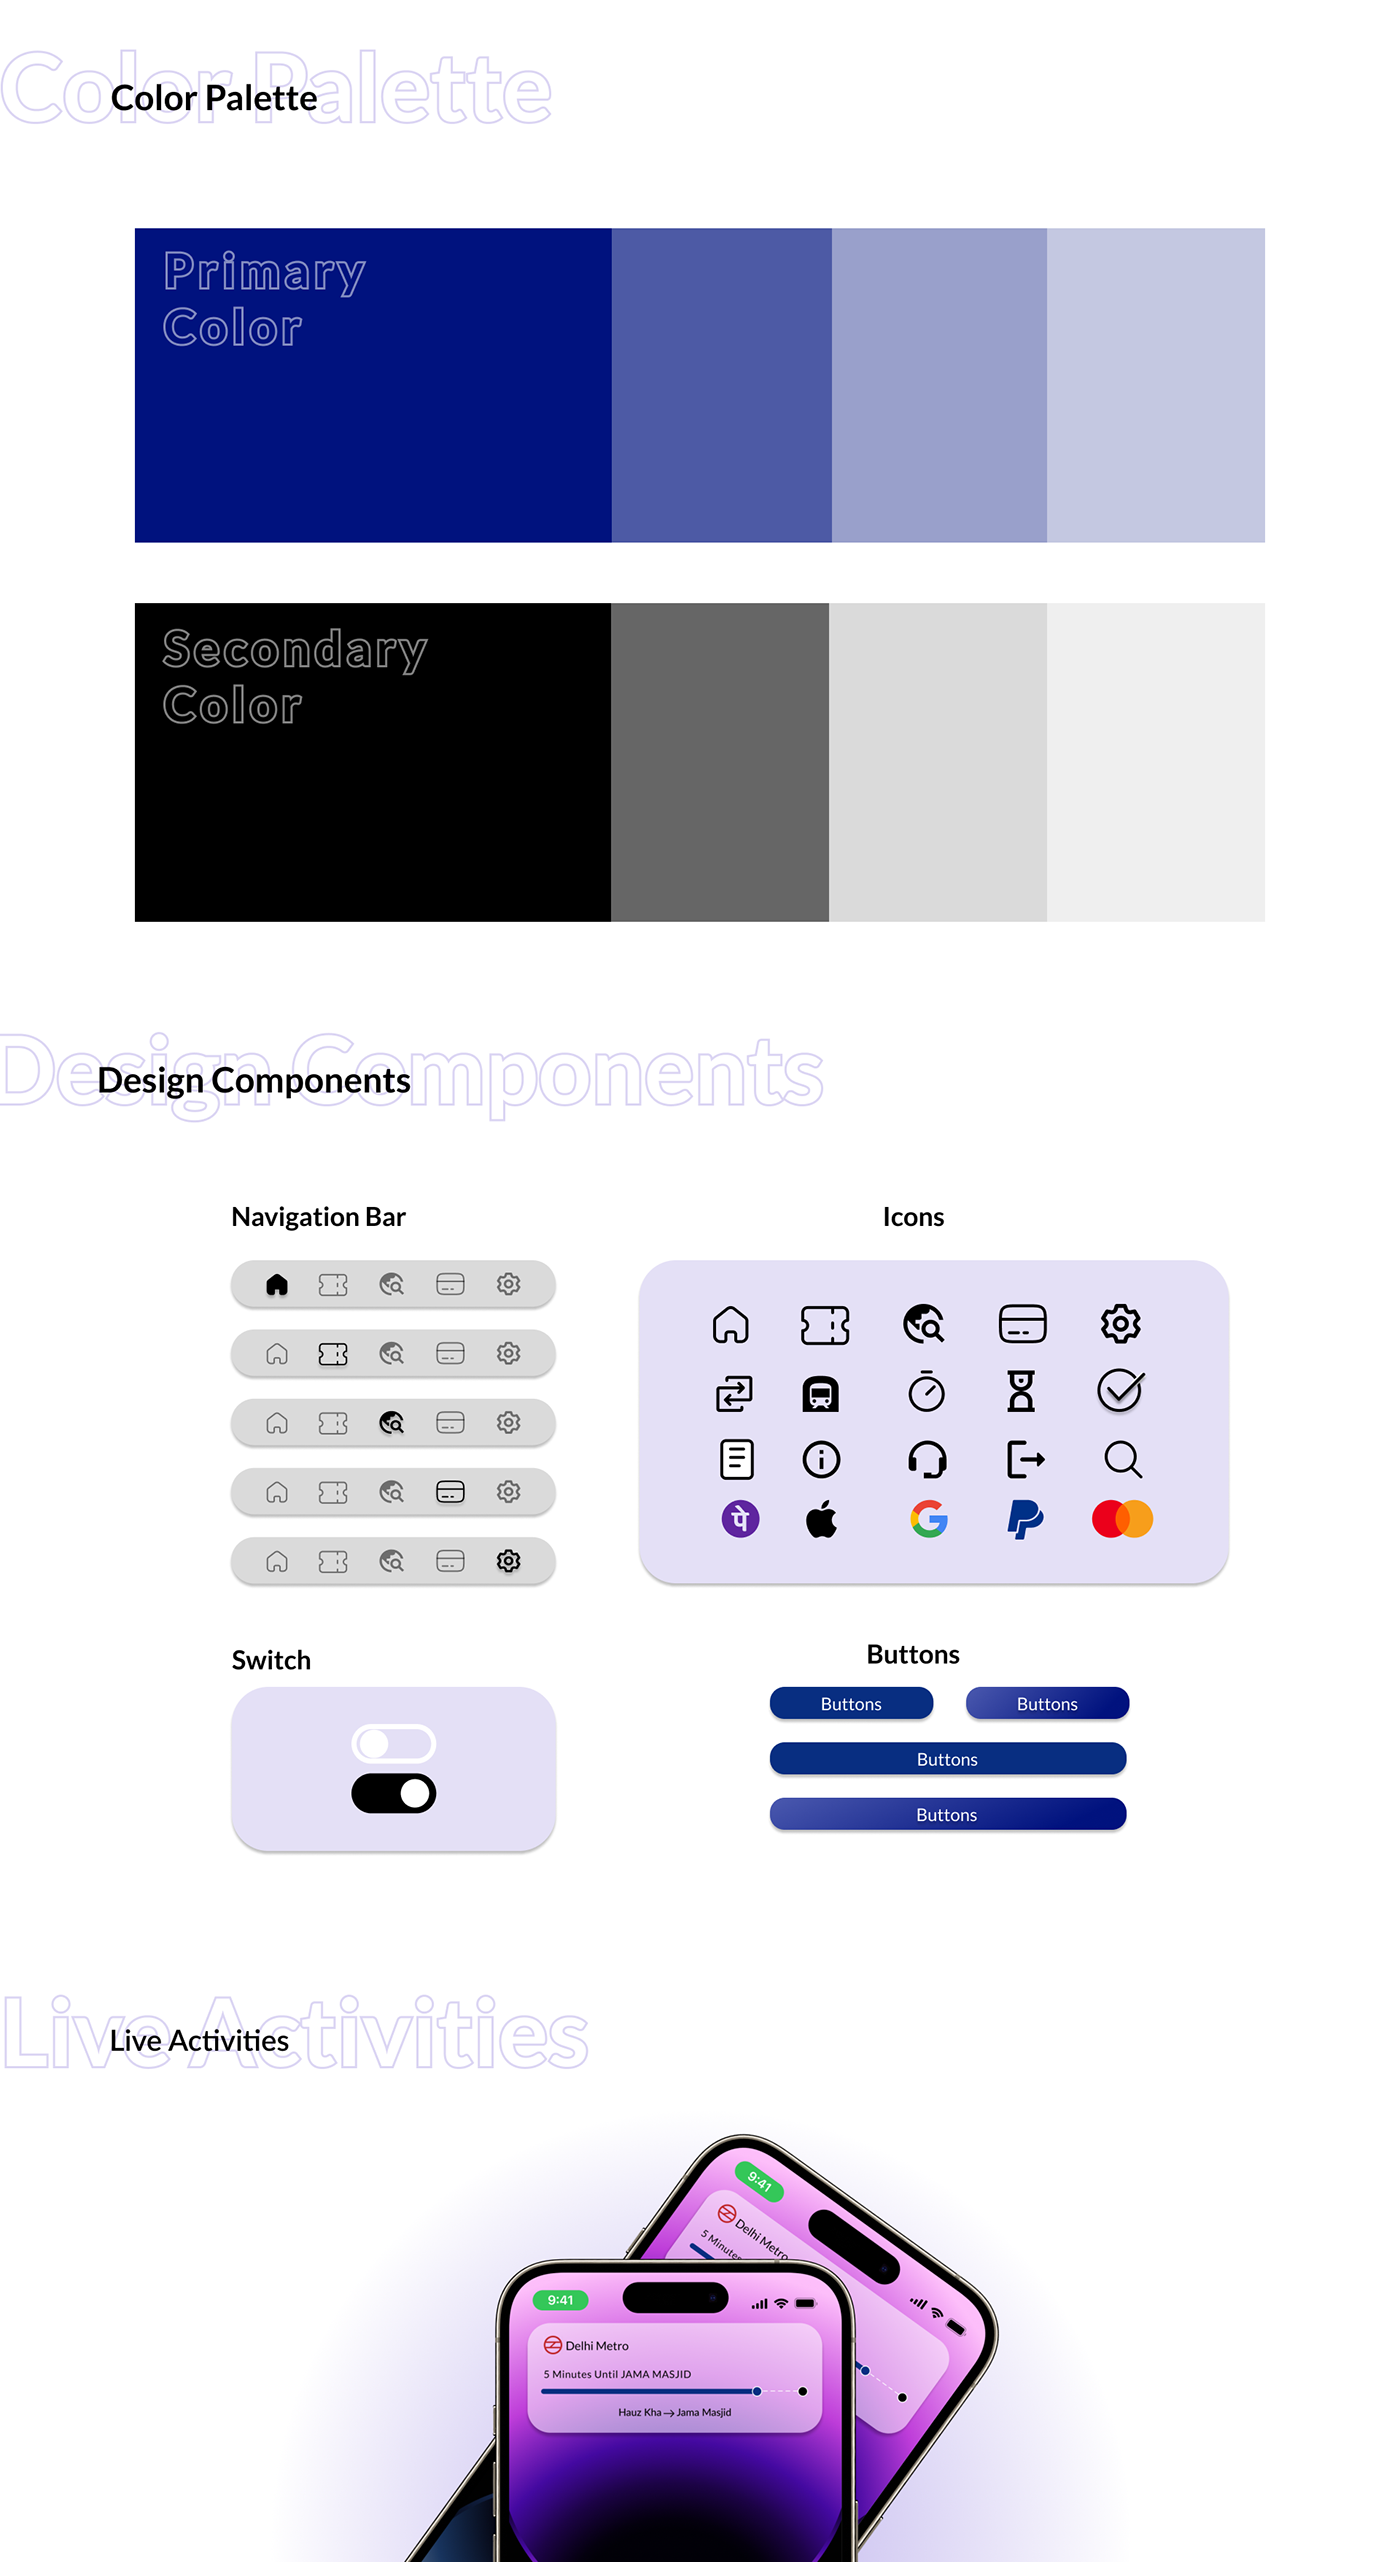 redesign ui ux user interface user experience Figma app design Case Study research graphic design 